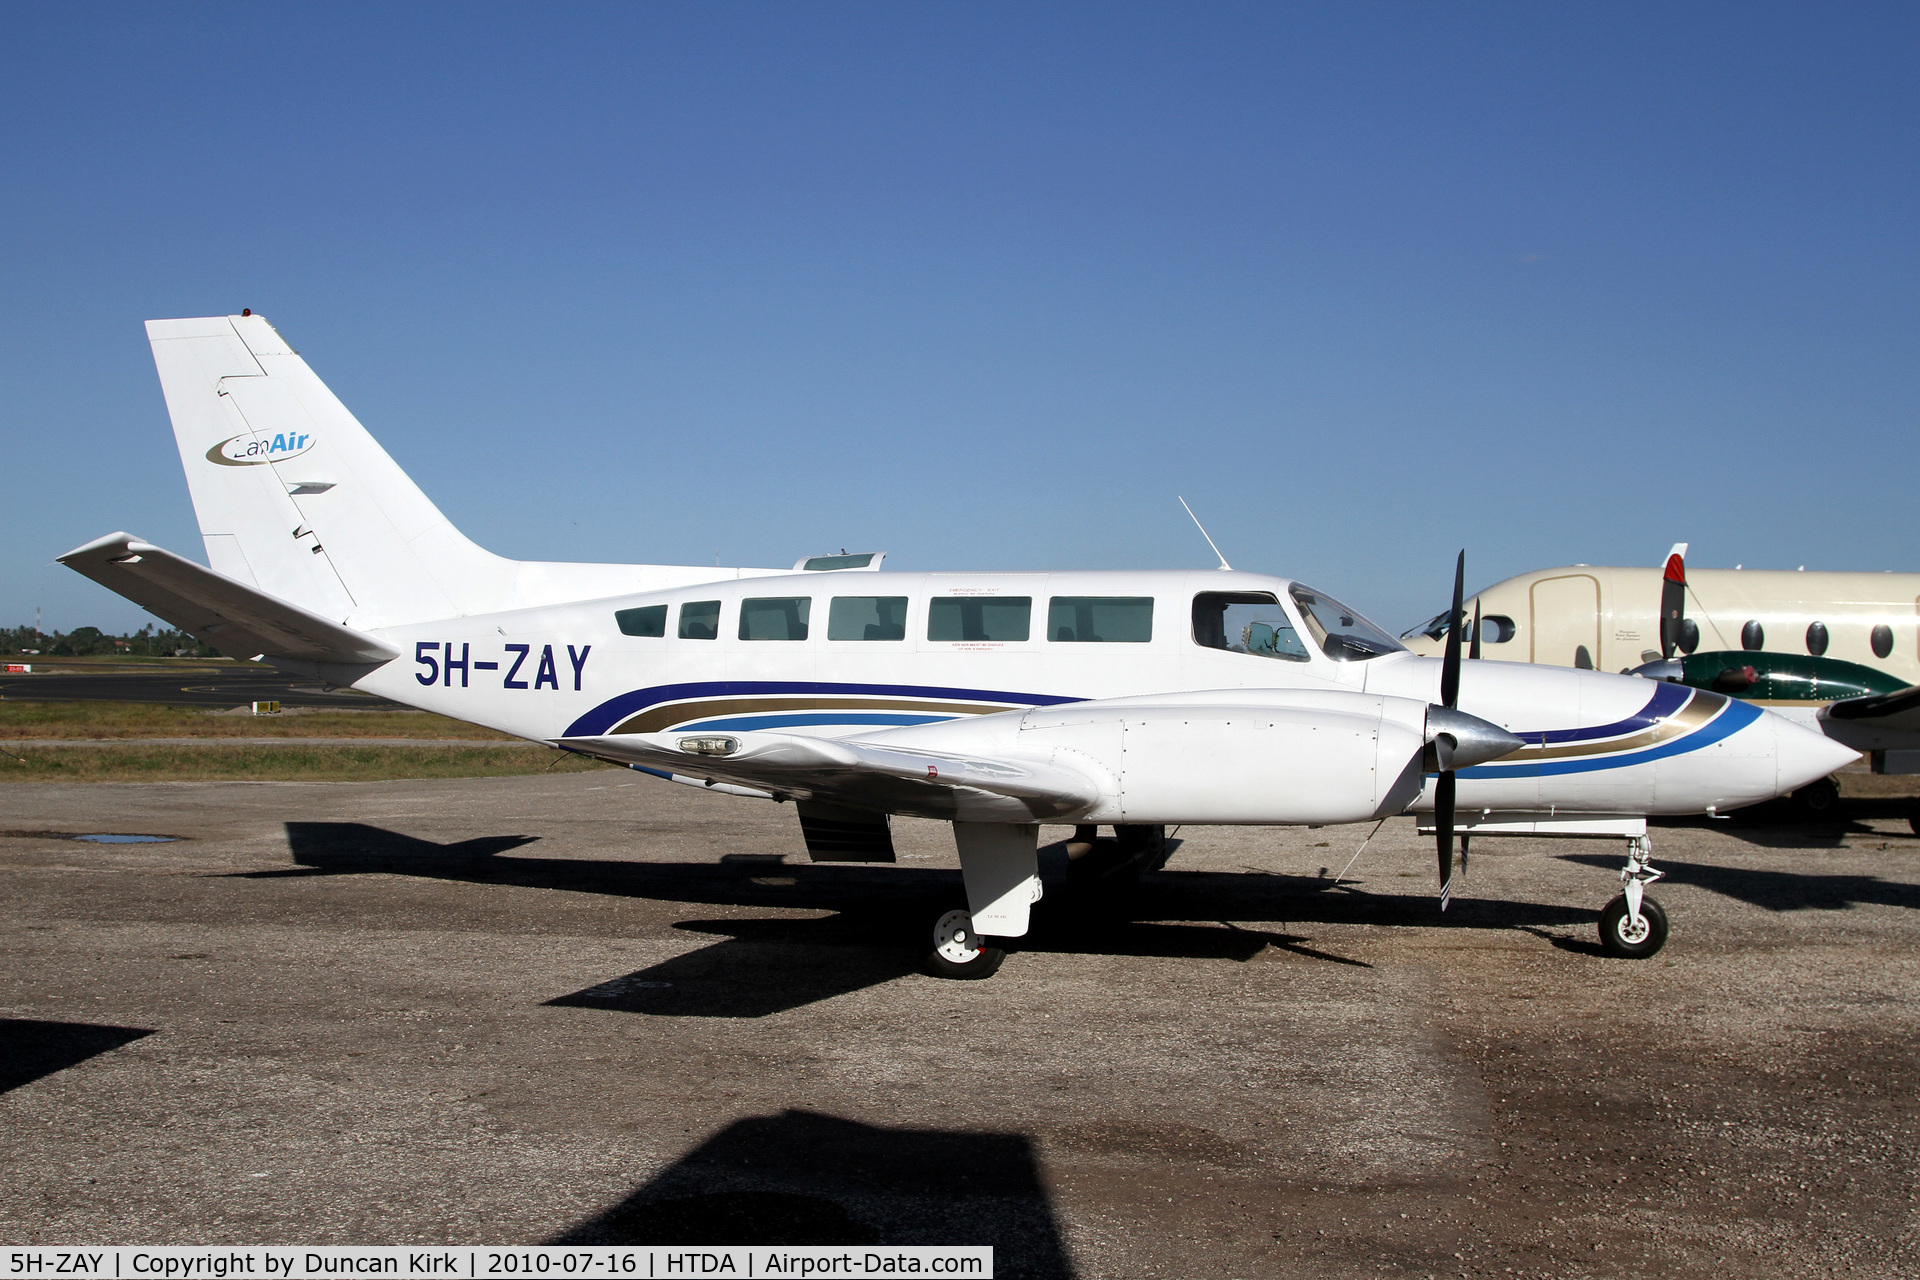 5H-ZAY, 1978 Cessna 404 Titan C/N 404-0207, Cessna 404's are being replaced with Caravan's.